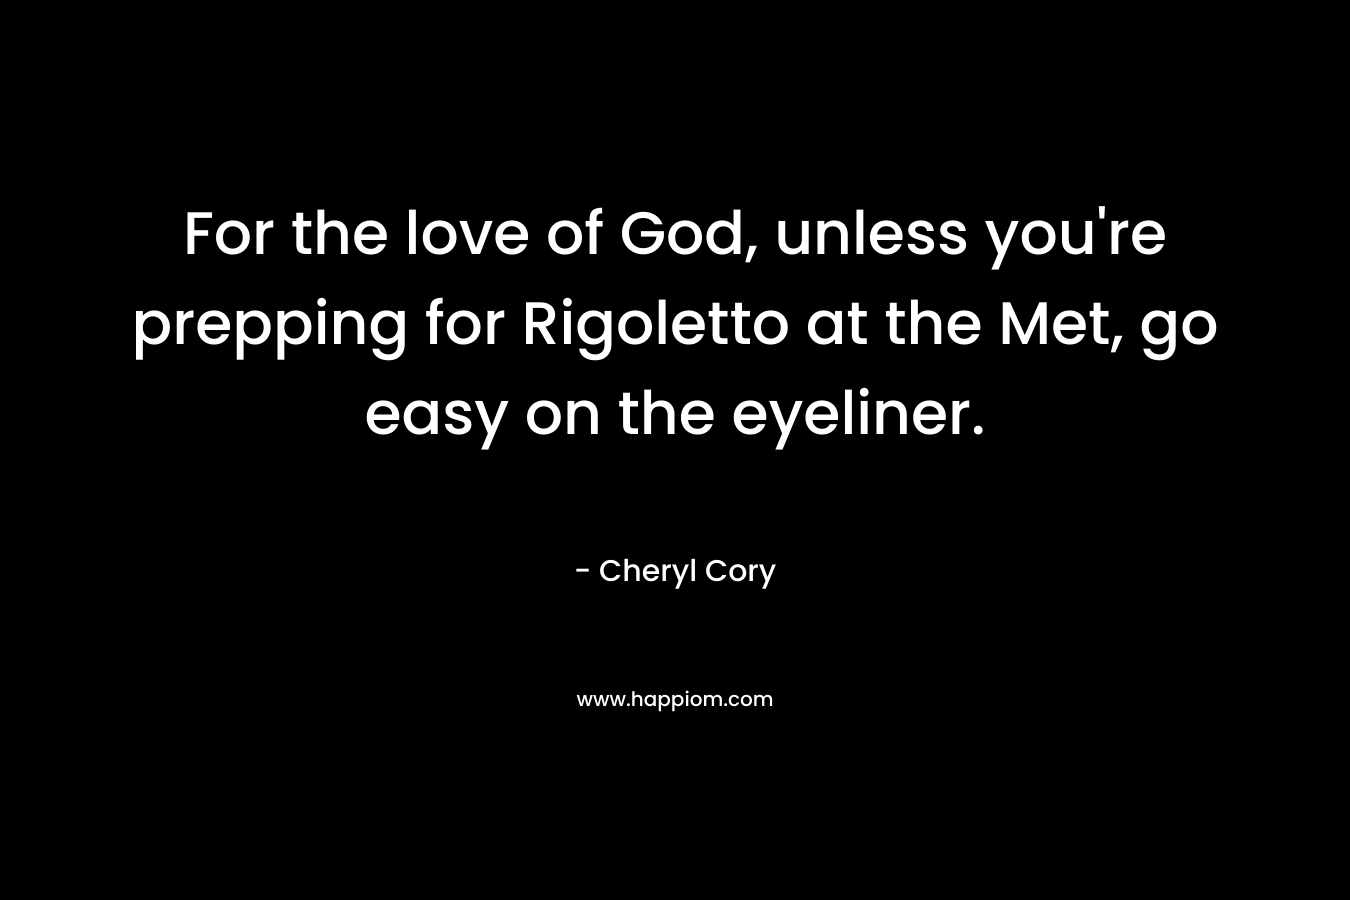 For the love of God, unless you're prepping for Rigoletto at the Met, go easy on the eyeliner.